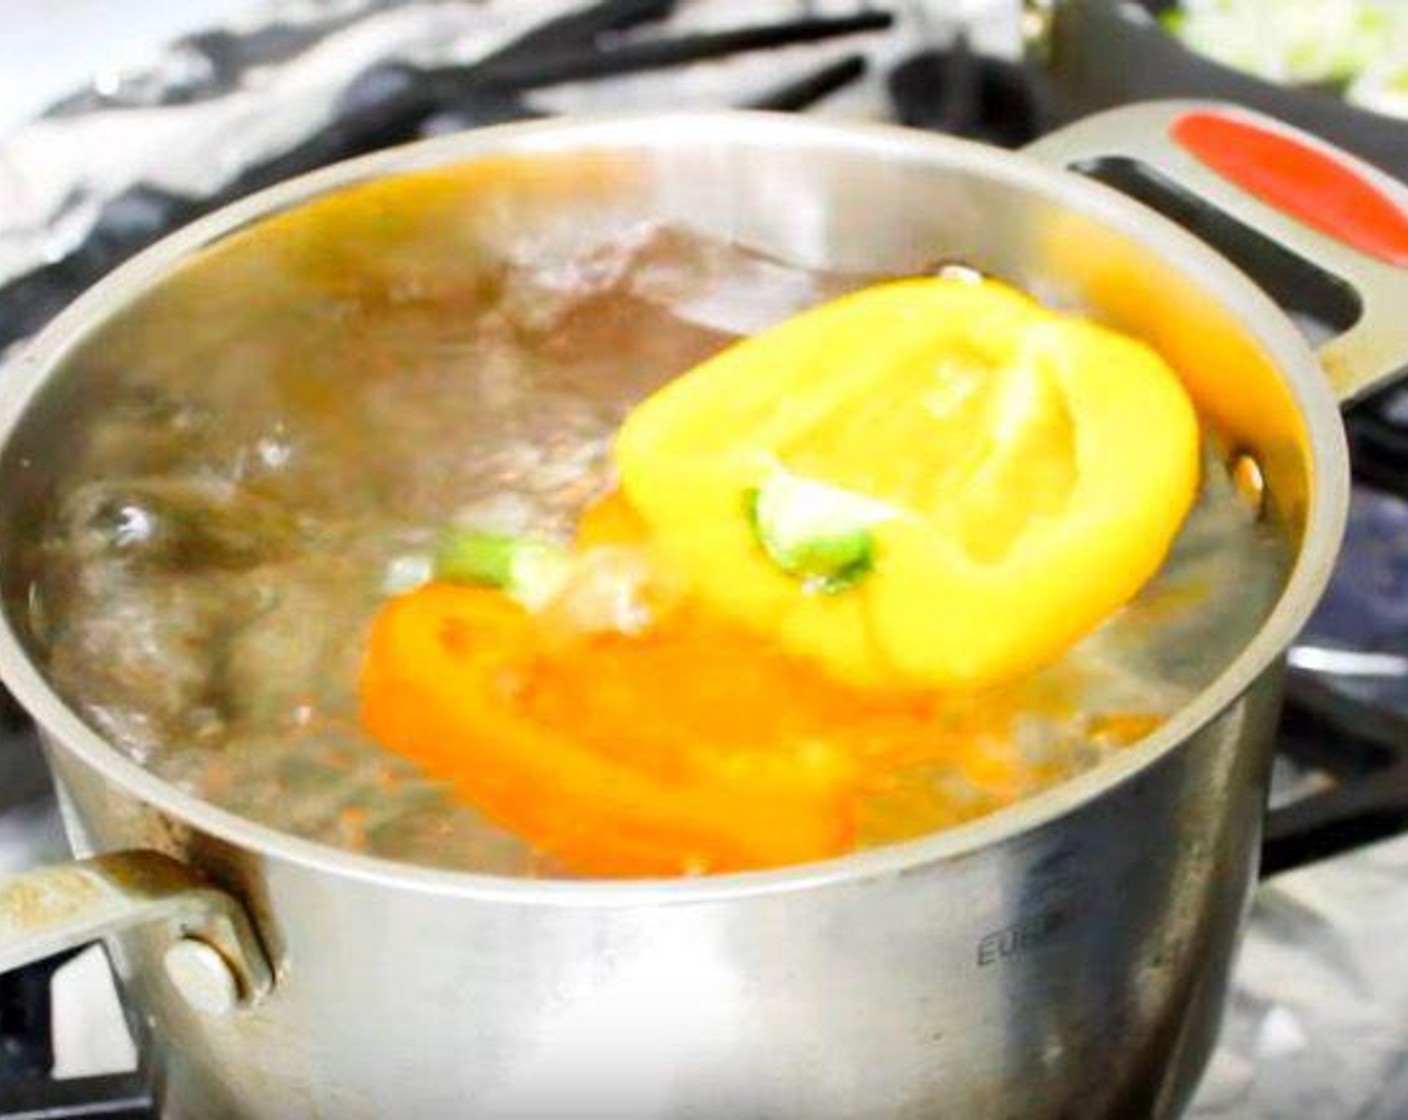 step 2 Meanwhile, into a pot with boiling water, add Assorted Color Bell Peppers (4). Cook for 5 minutes to soften.